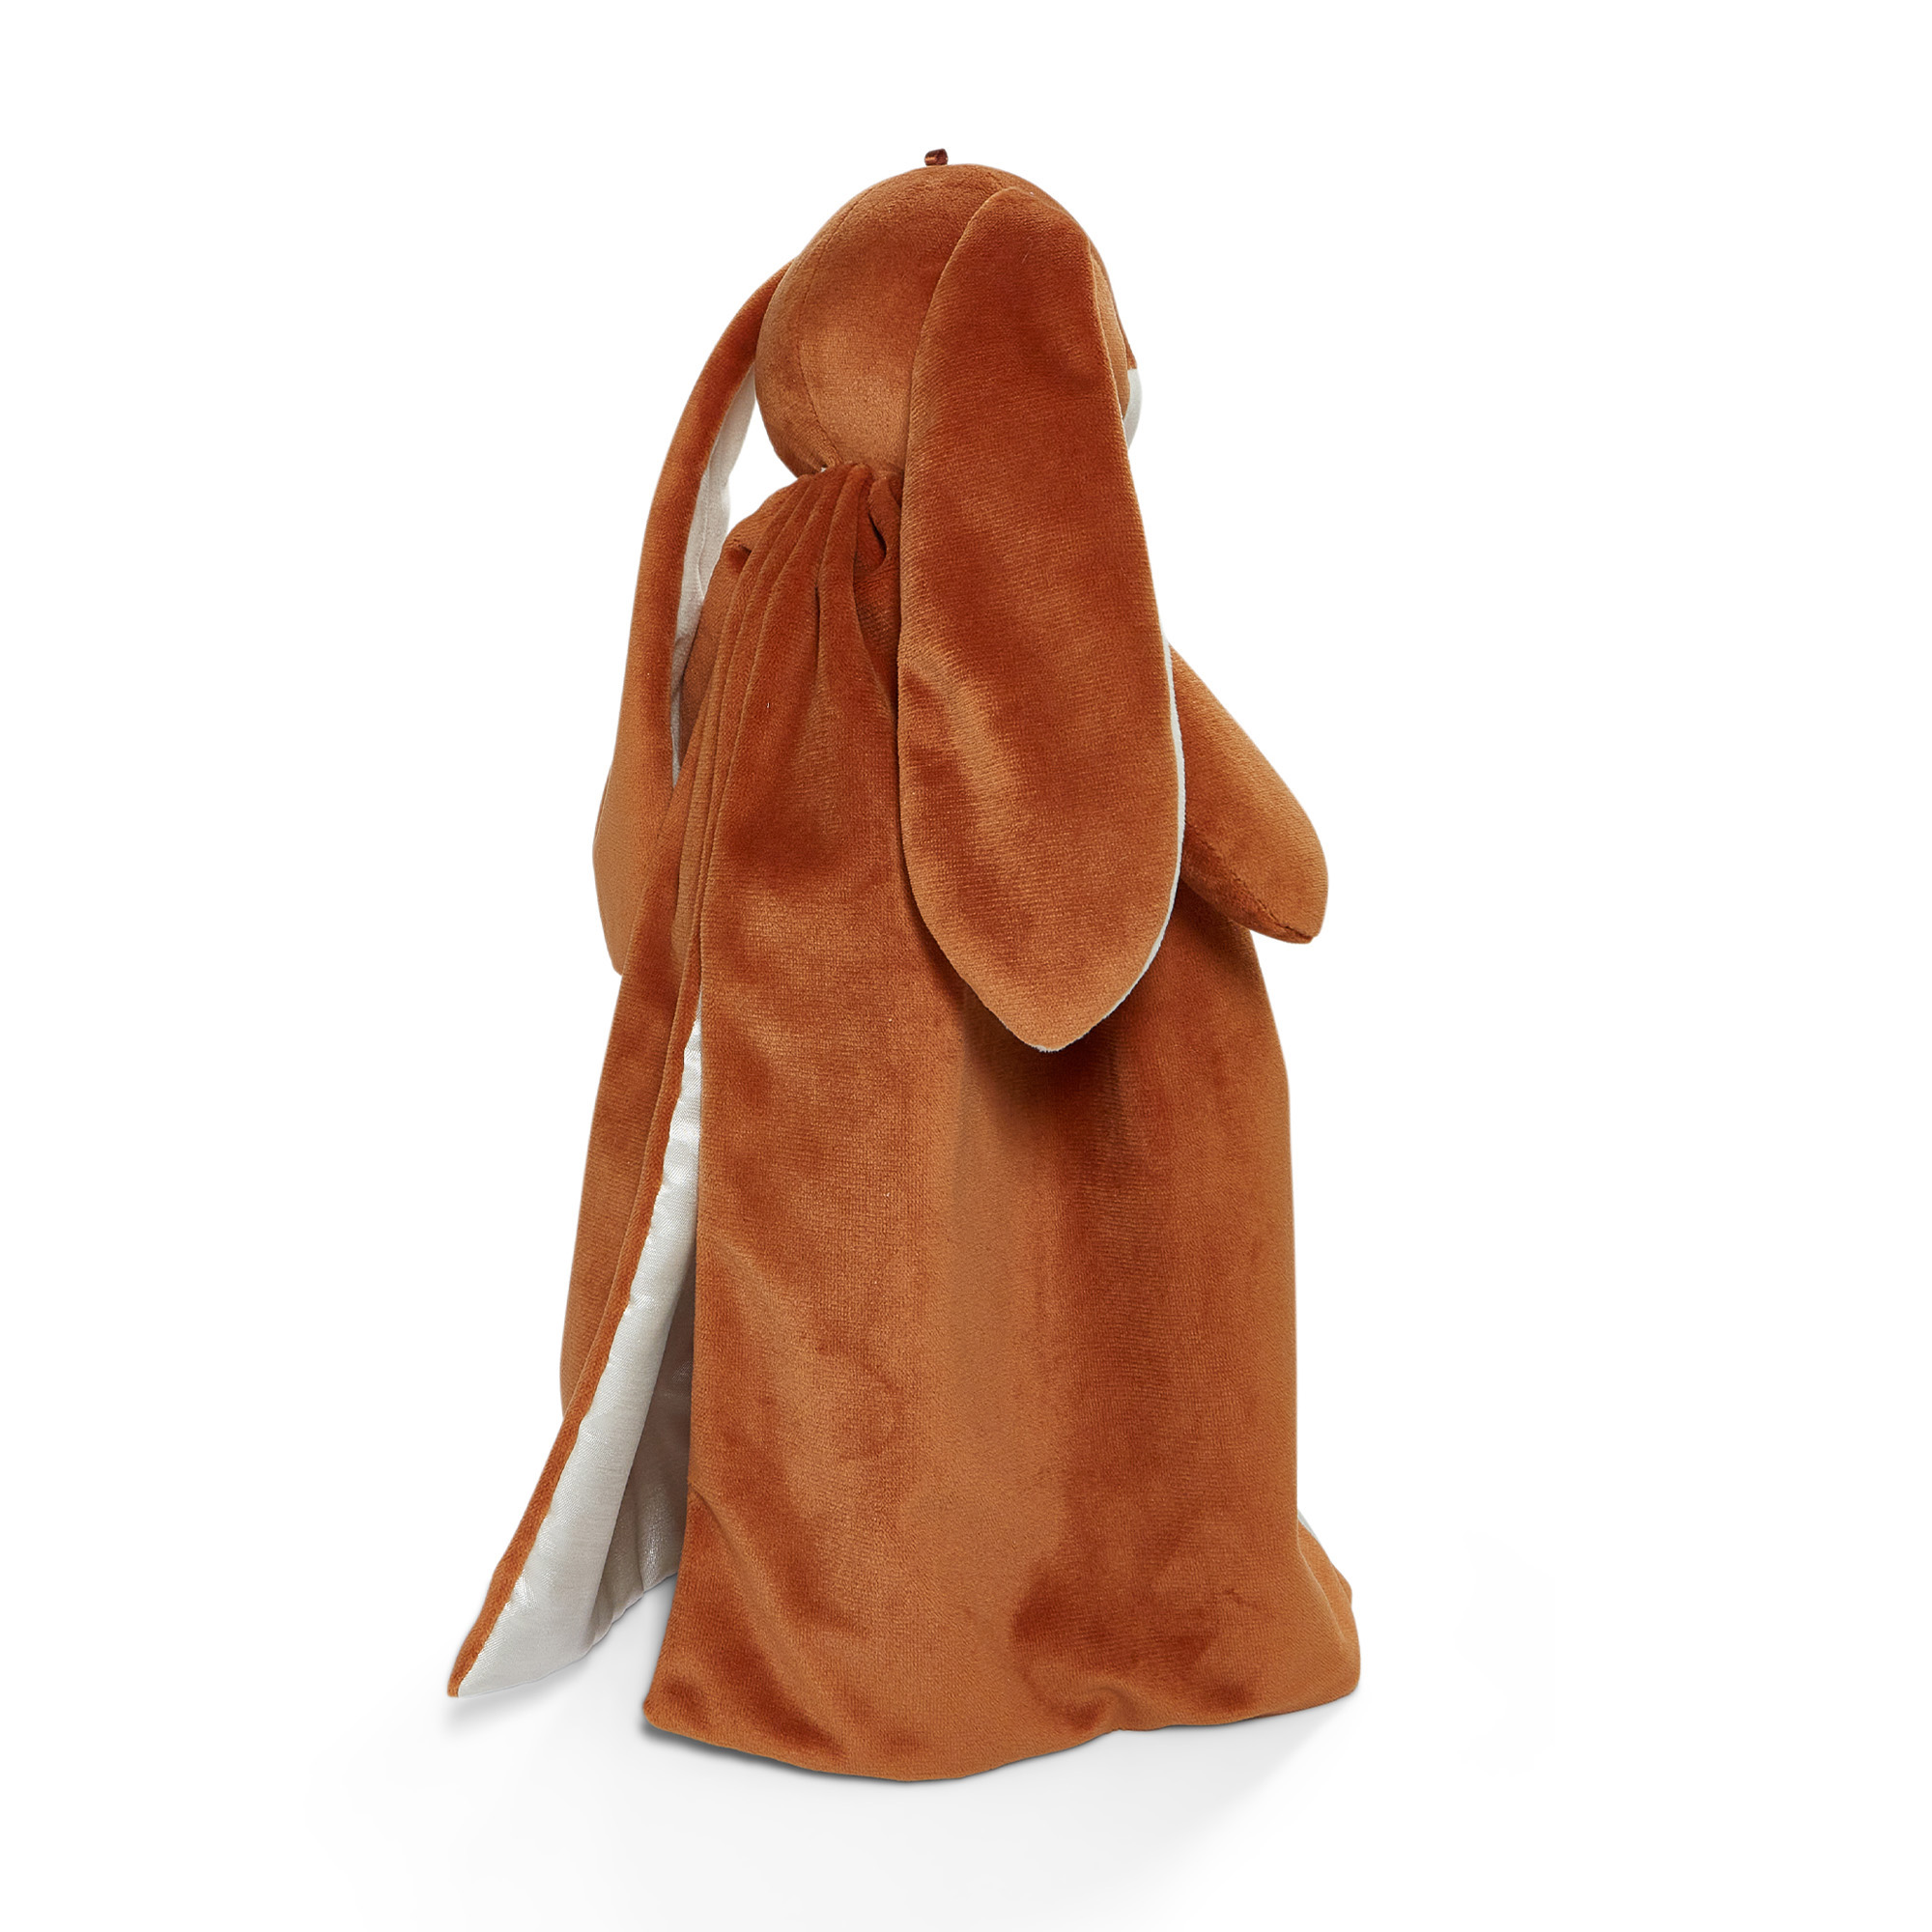 Coperta con peluche Nibble Blanket Paprika 39cm - Bunnies By The Bay